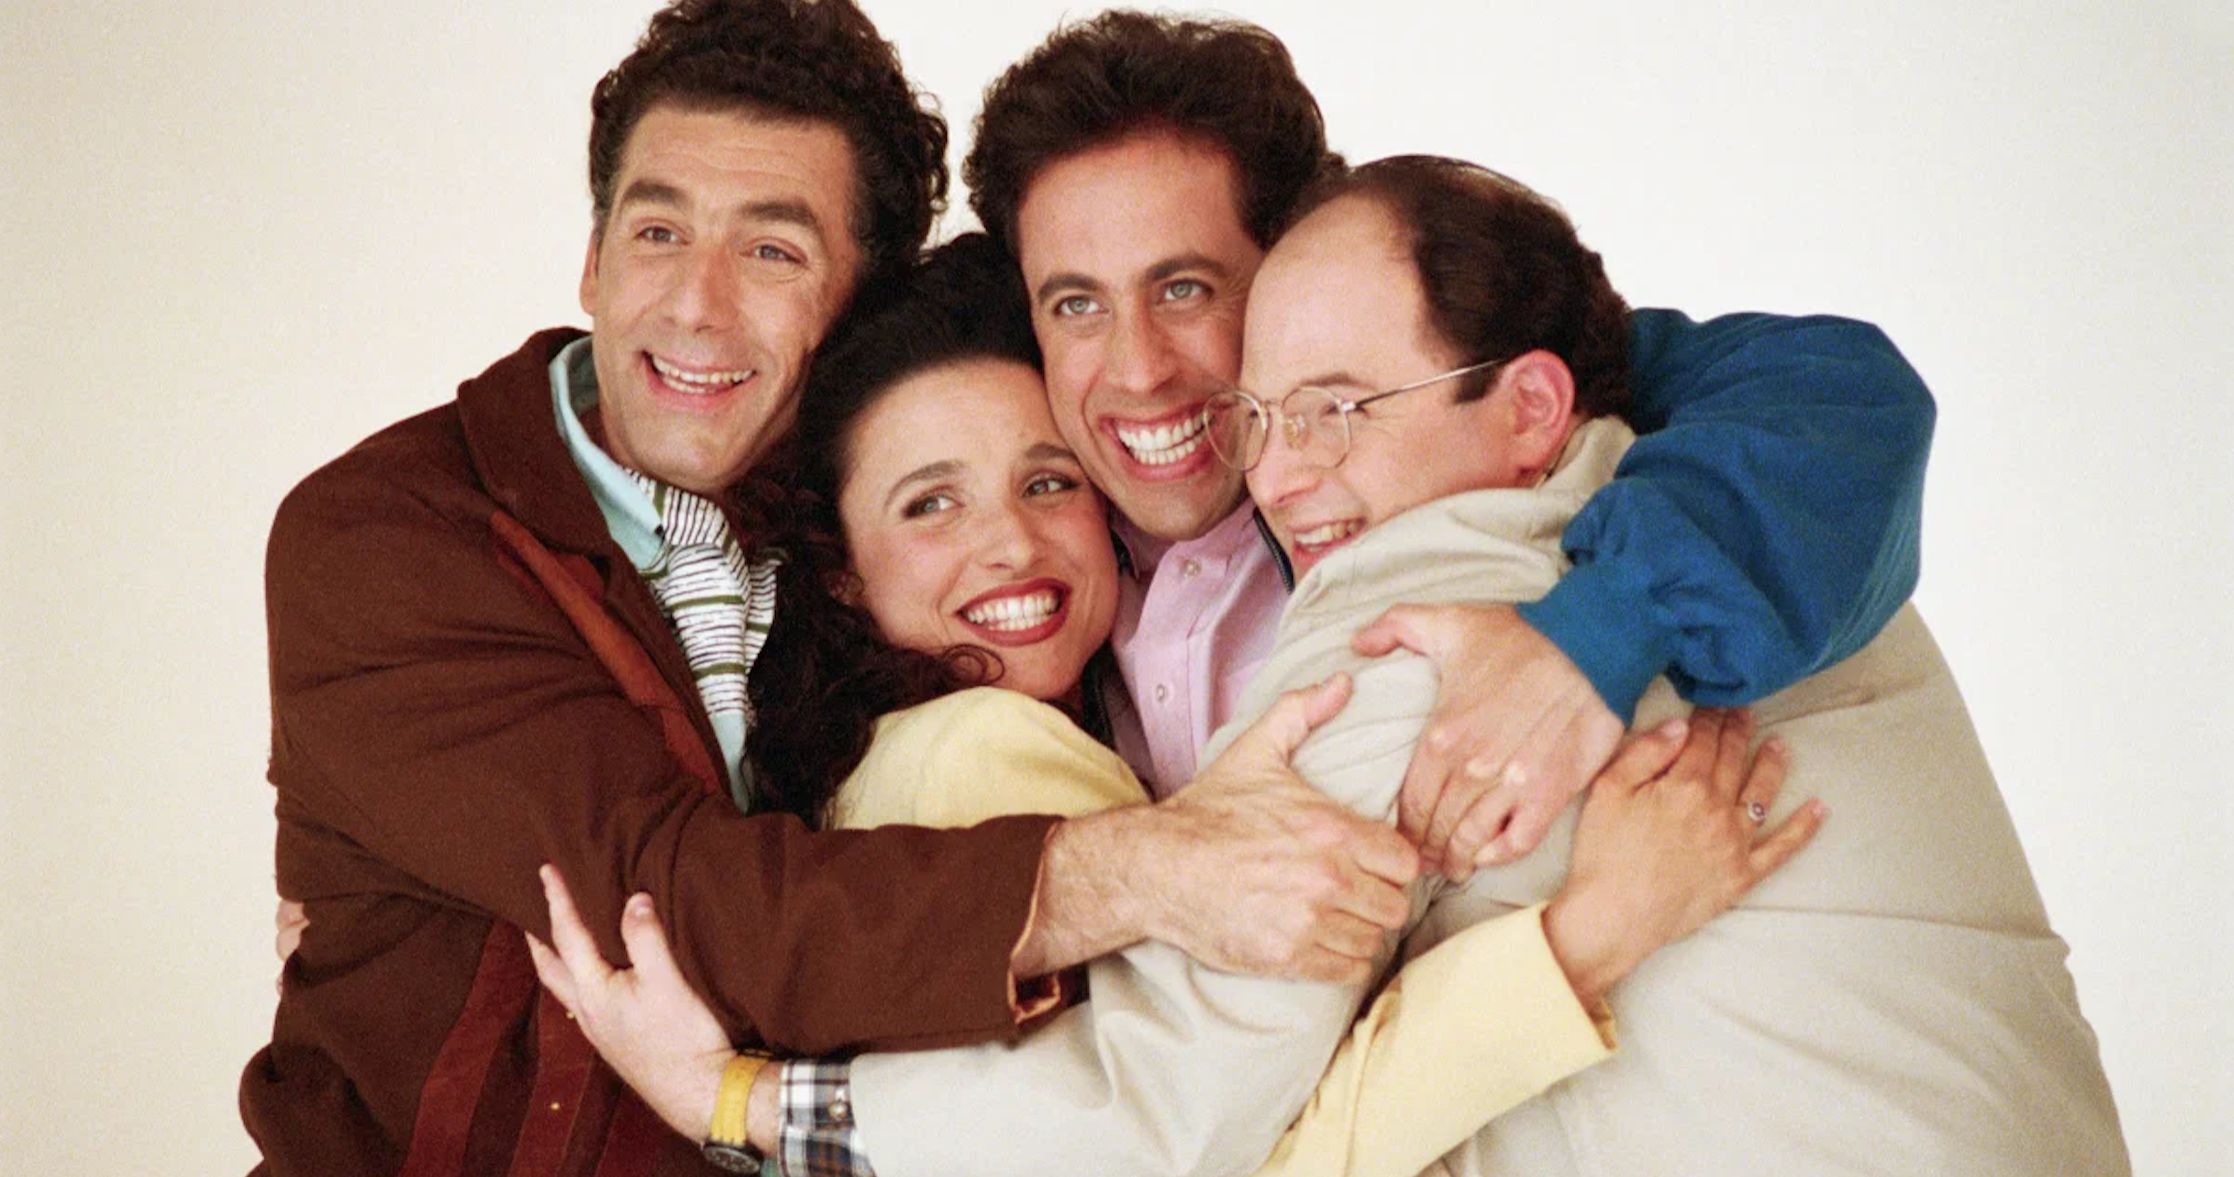 Every Seinfeld Episode Will Finally Be Streaming on Netflix This Fall